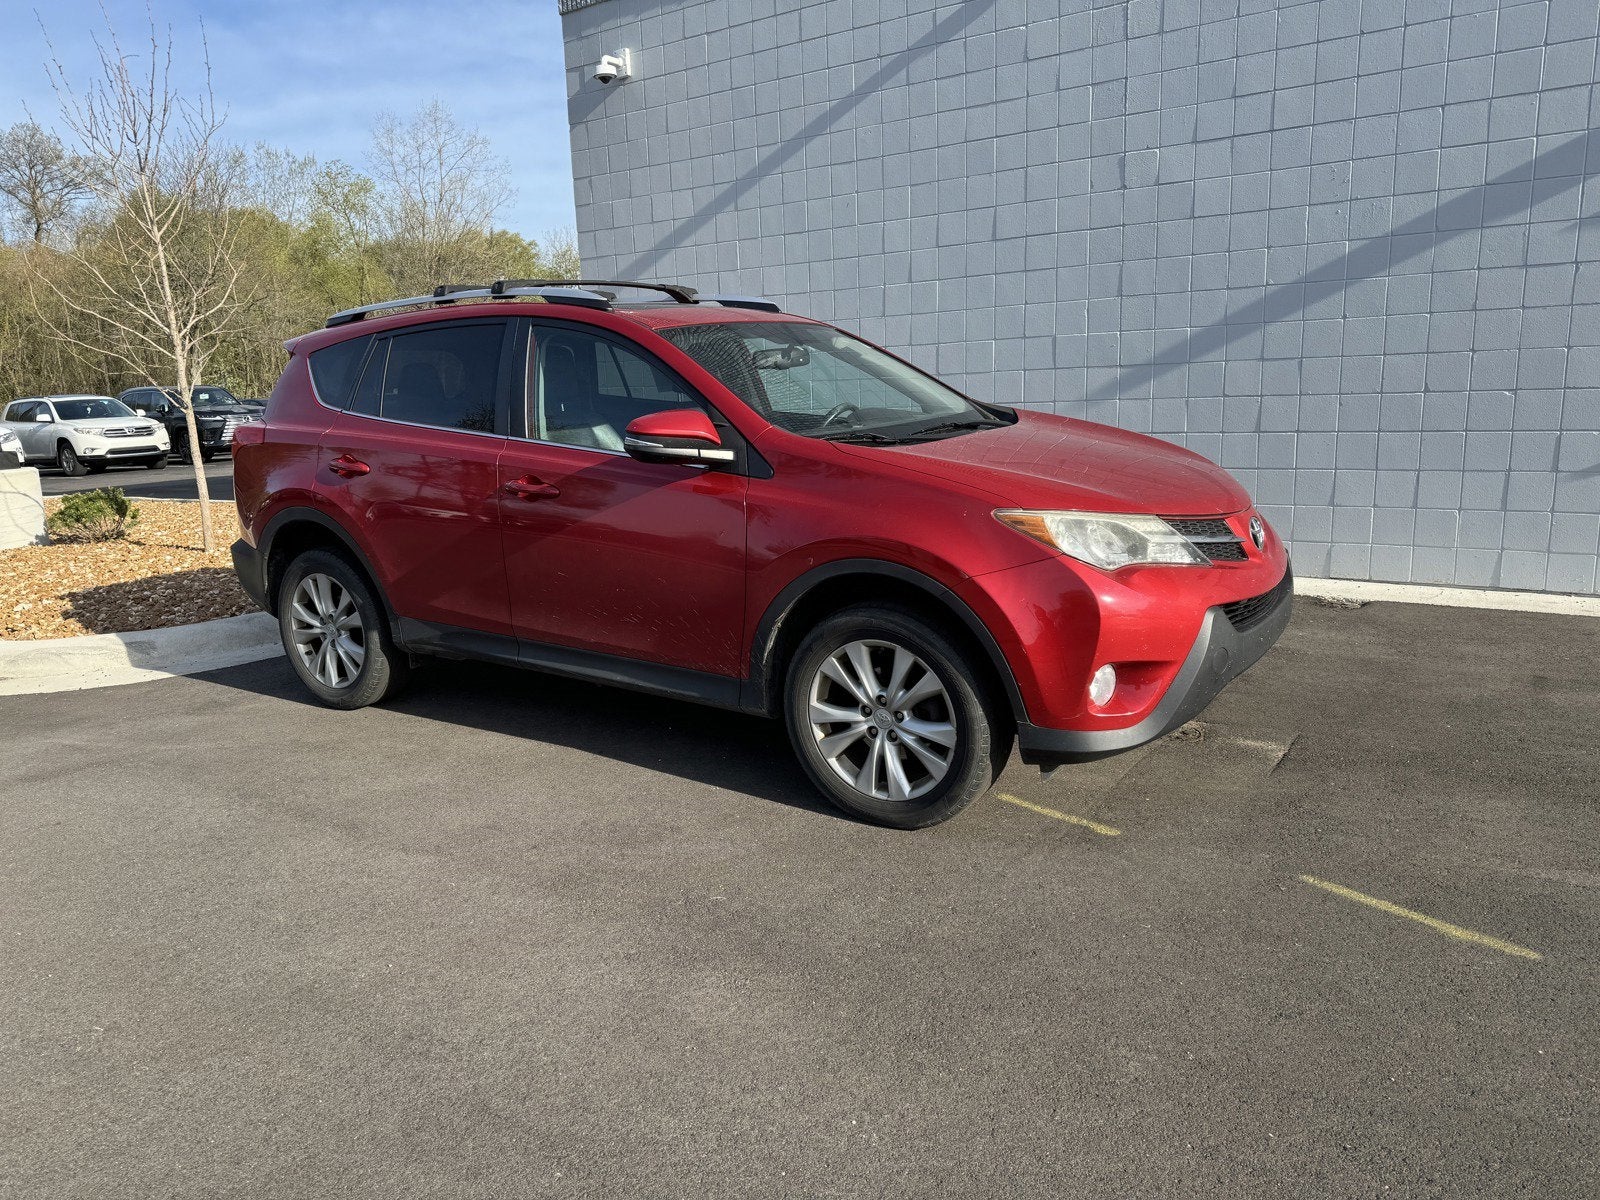 Used 2013 Toyota RAV4 Limited with VIN 2T3DFREVXDW115621 for sale in Mishawaka, IN